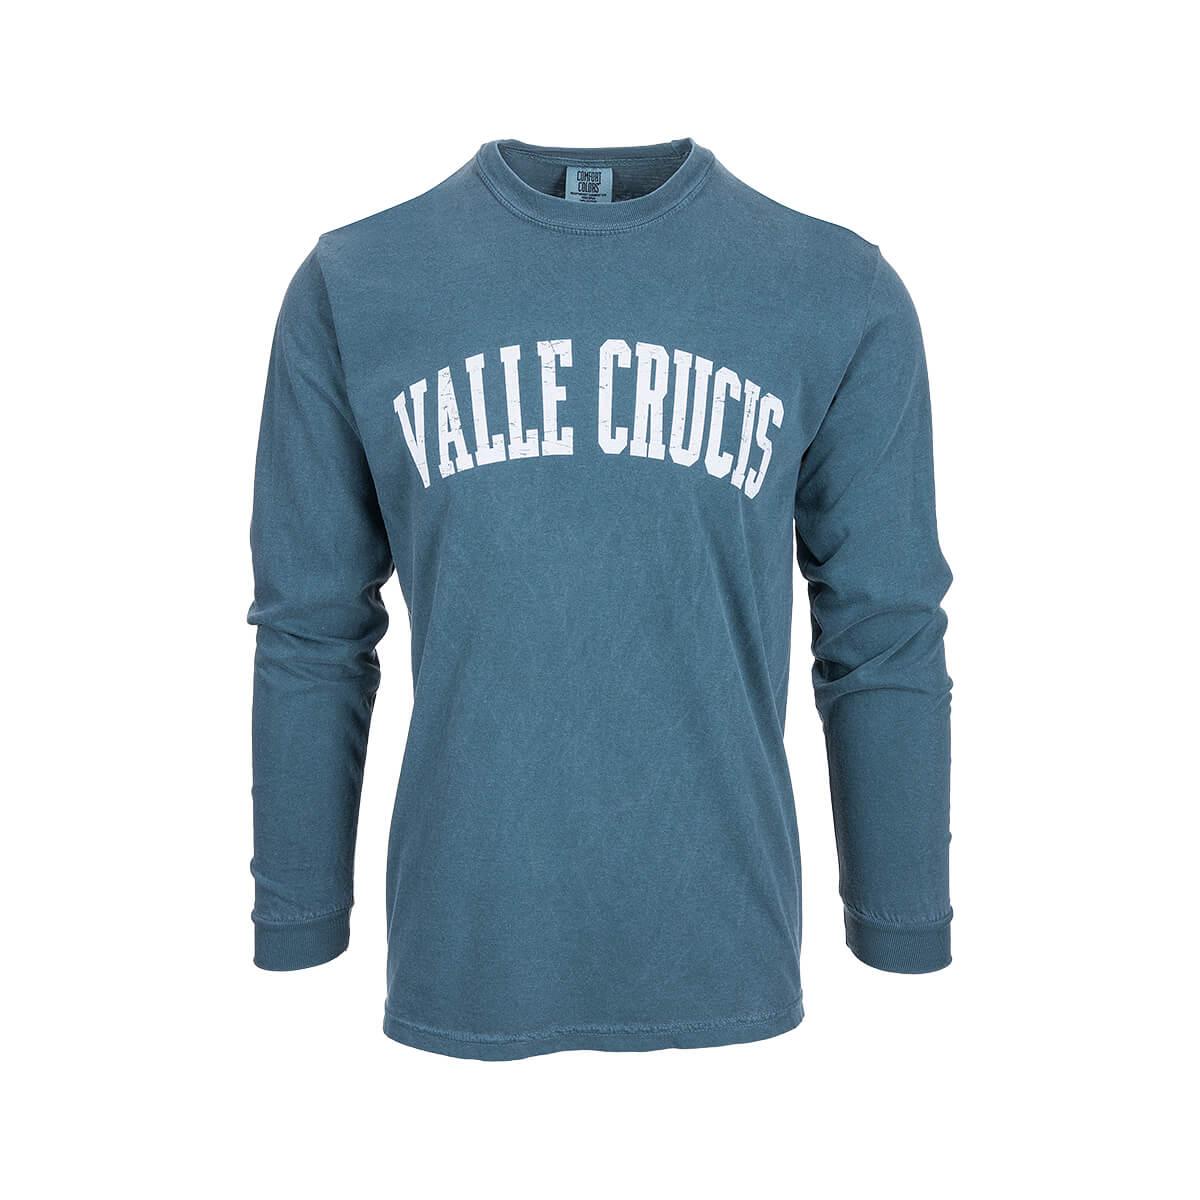  Mast General Store Valle Crucis Long Sleeve T- Shirt